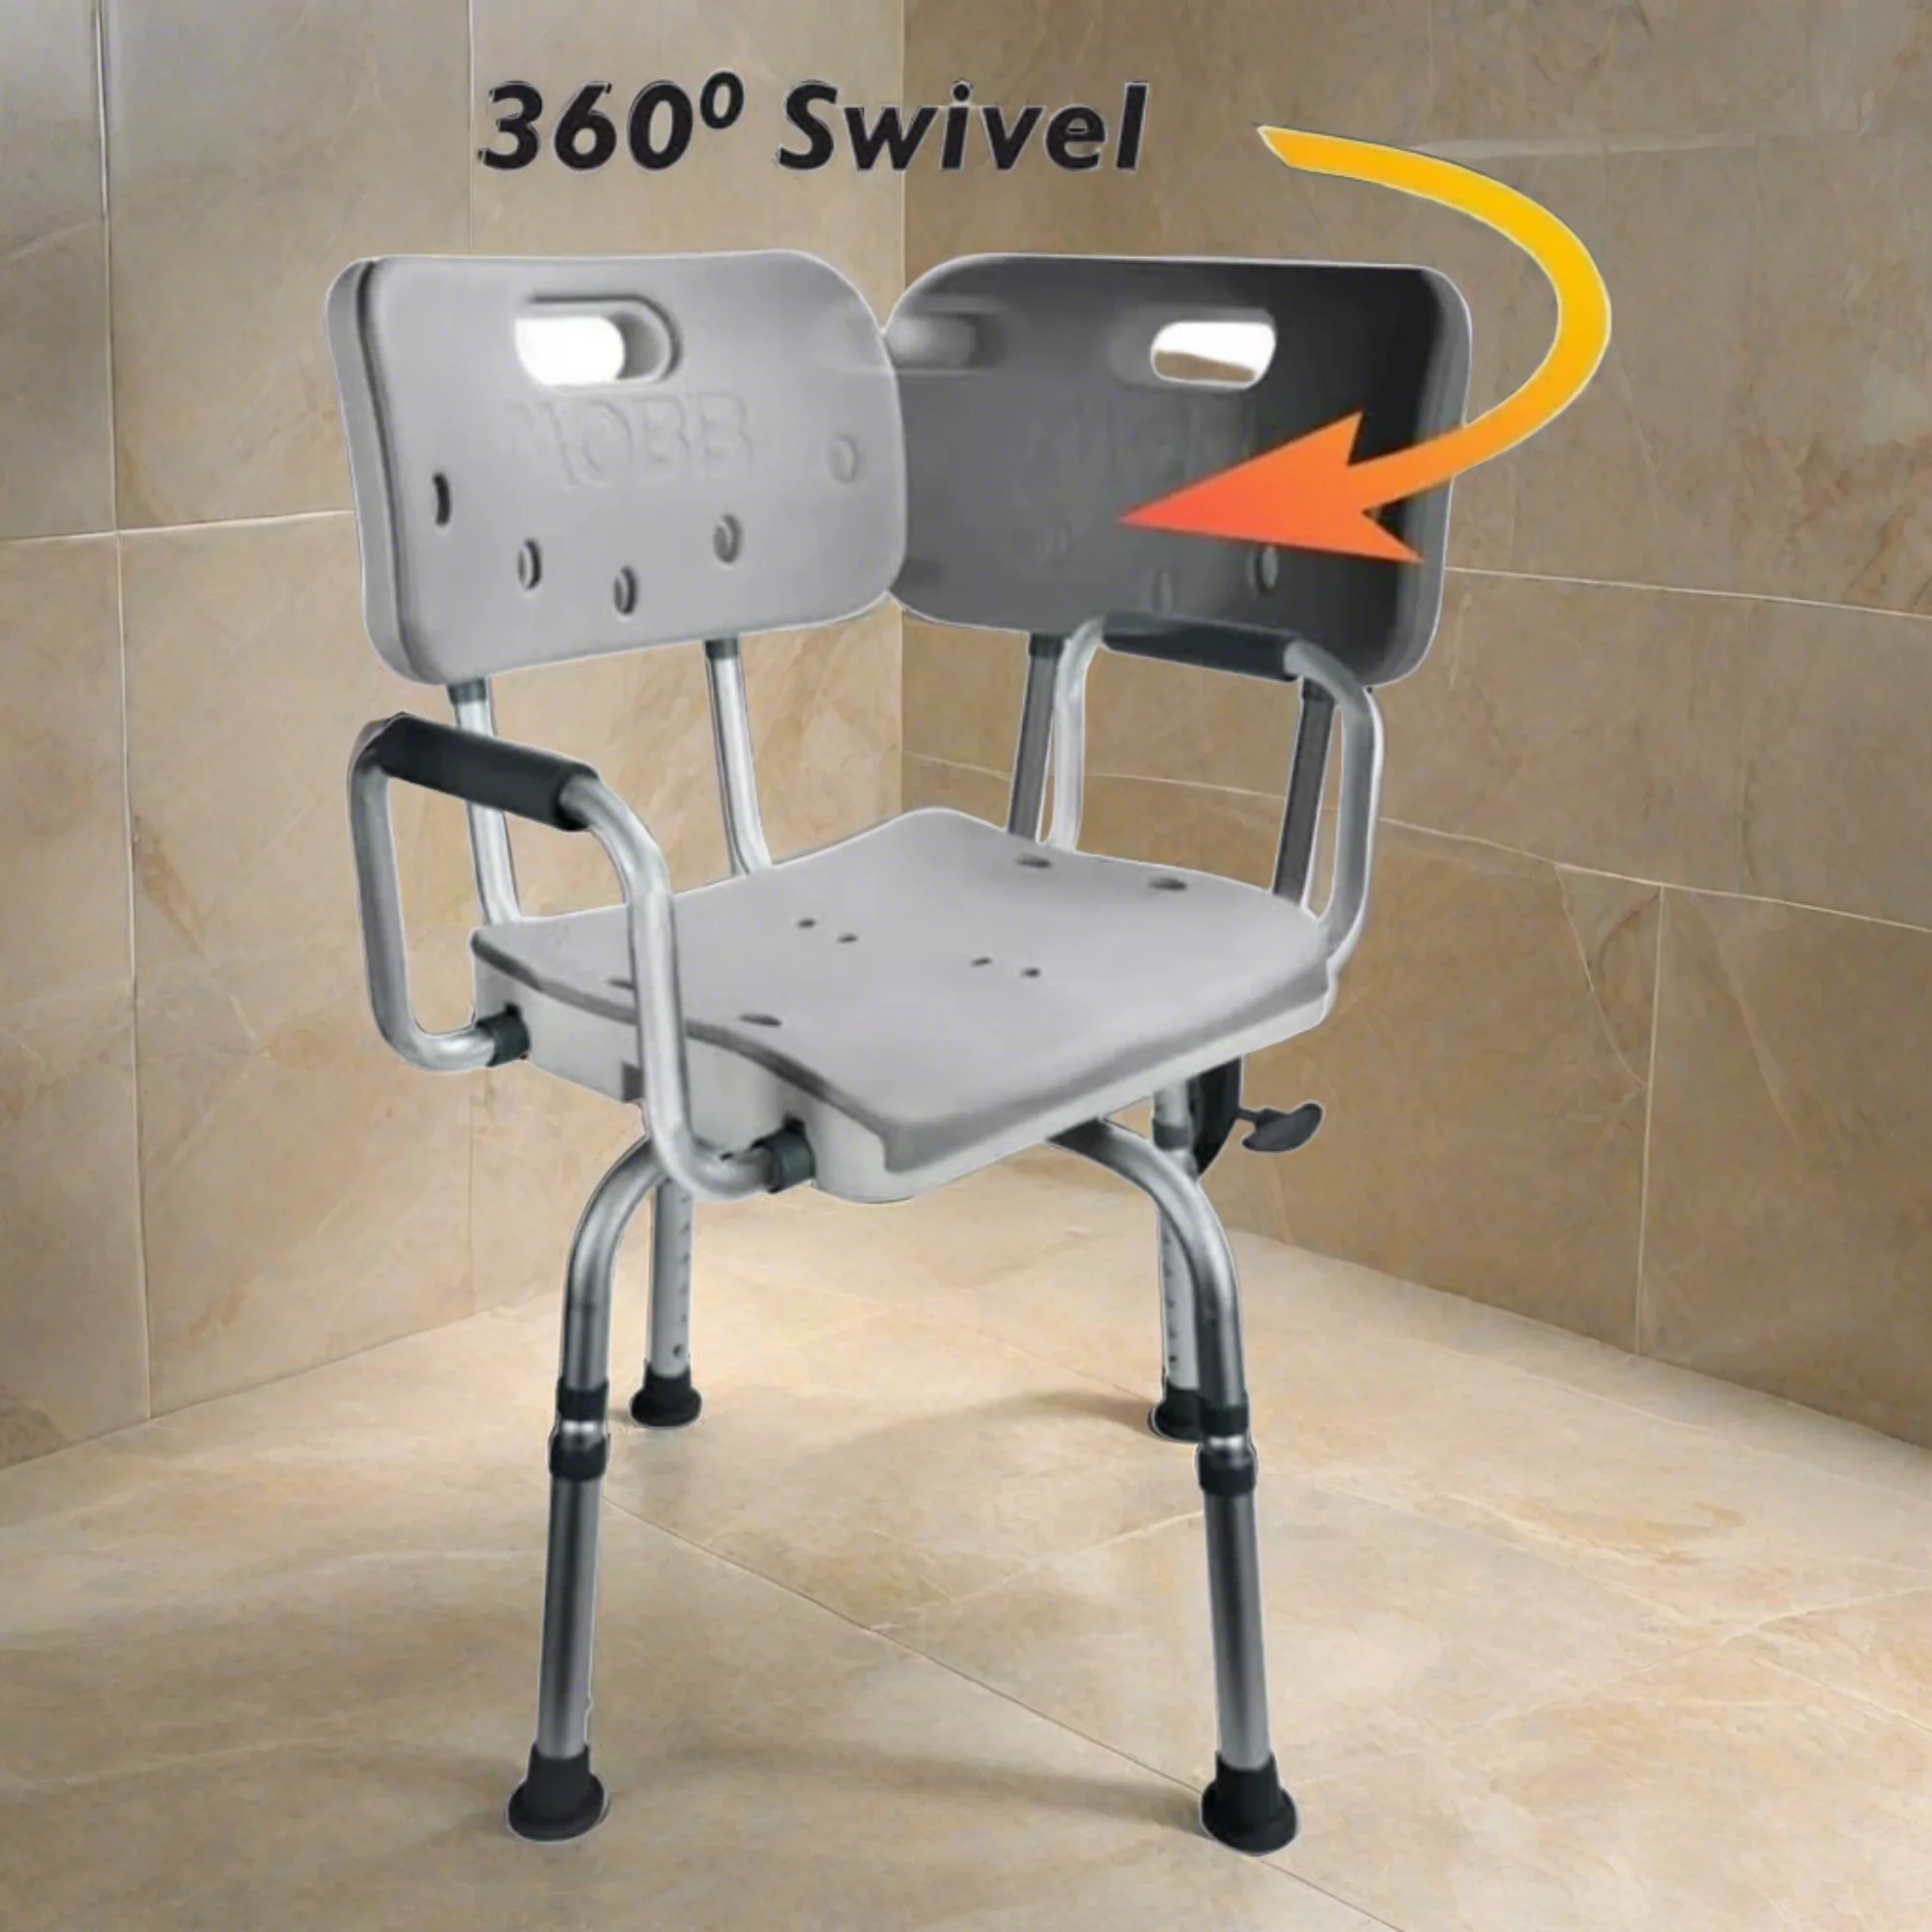 MOBB Swivel Shower Chair 3.0 - 360° Rotating Seat, Adjustable, 300 lbs Rustproof - Picture 4 of 12